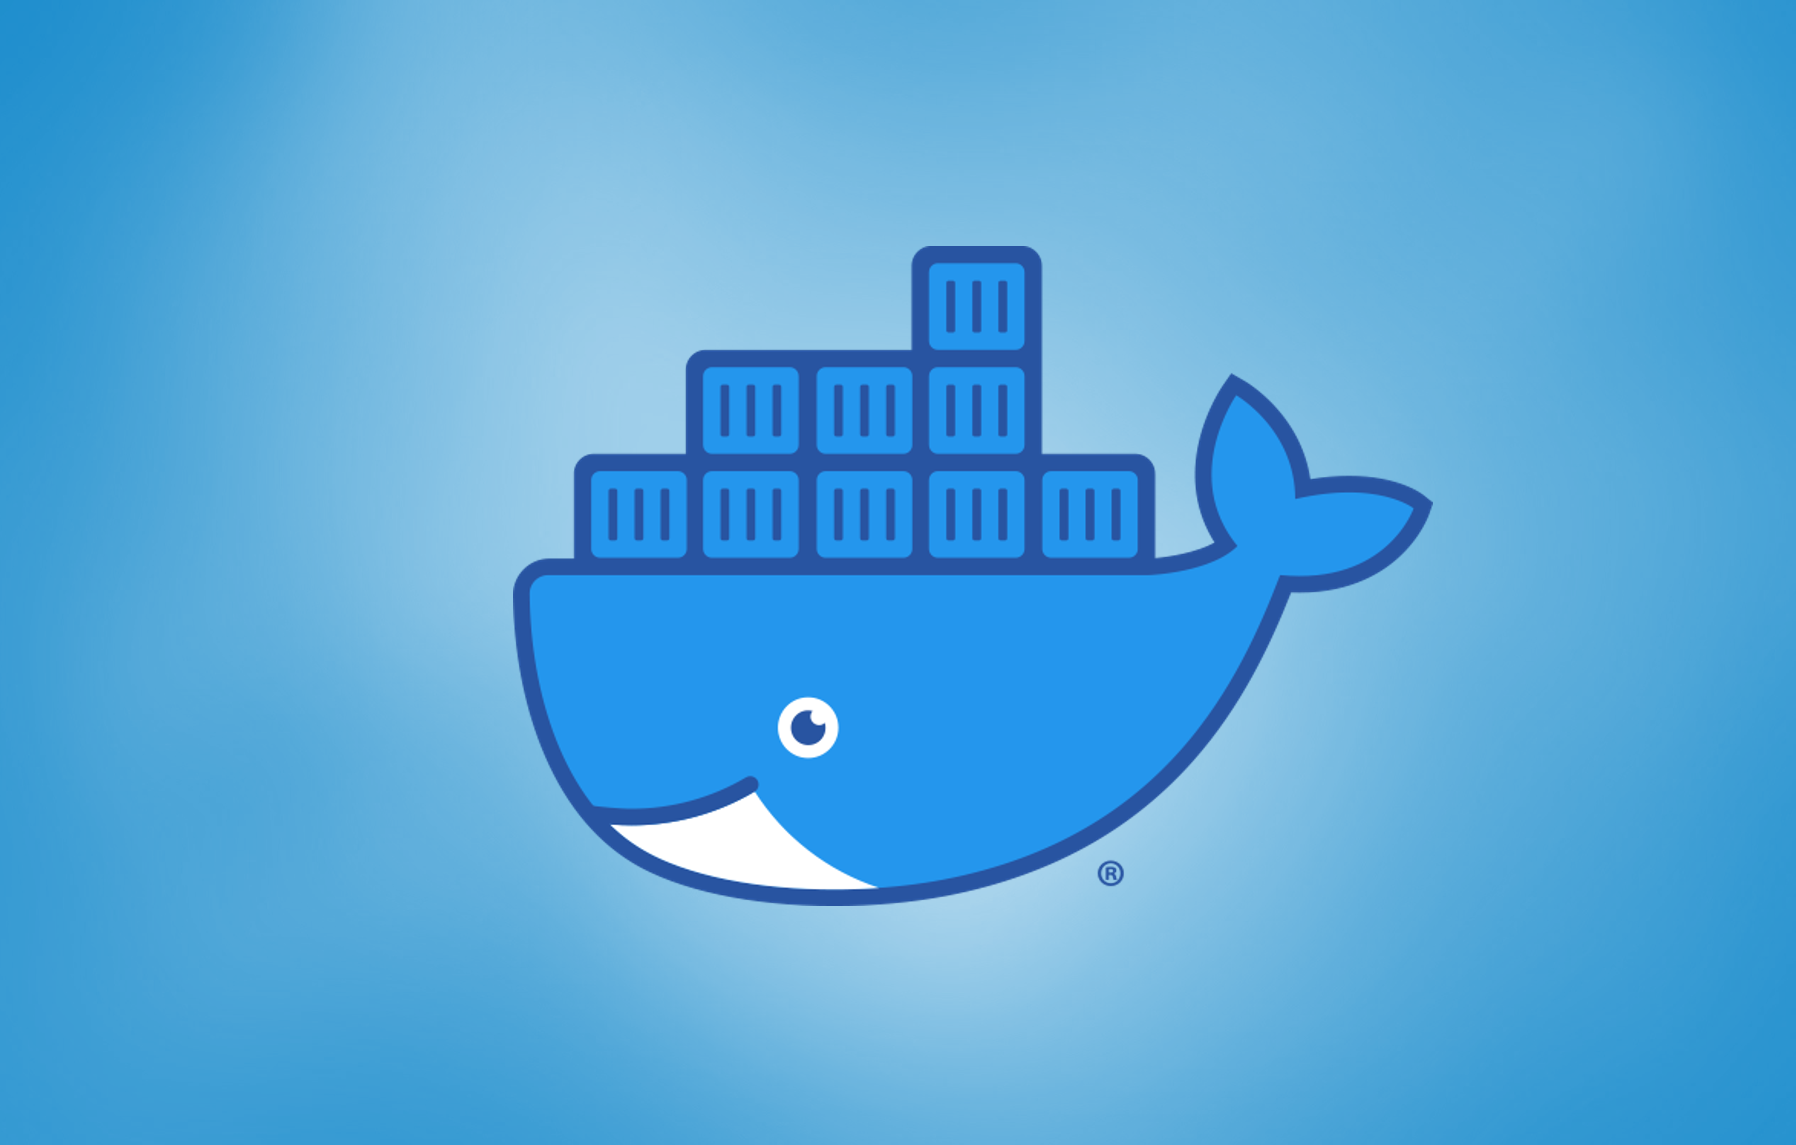 Dockerfile is a text file that contains all the commands to build a Docker image. In this tutorial, you will learn about Dockerfile.